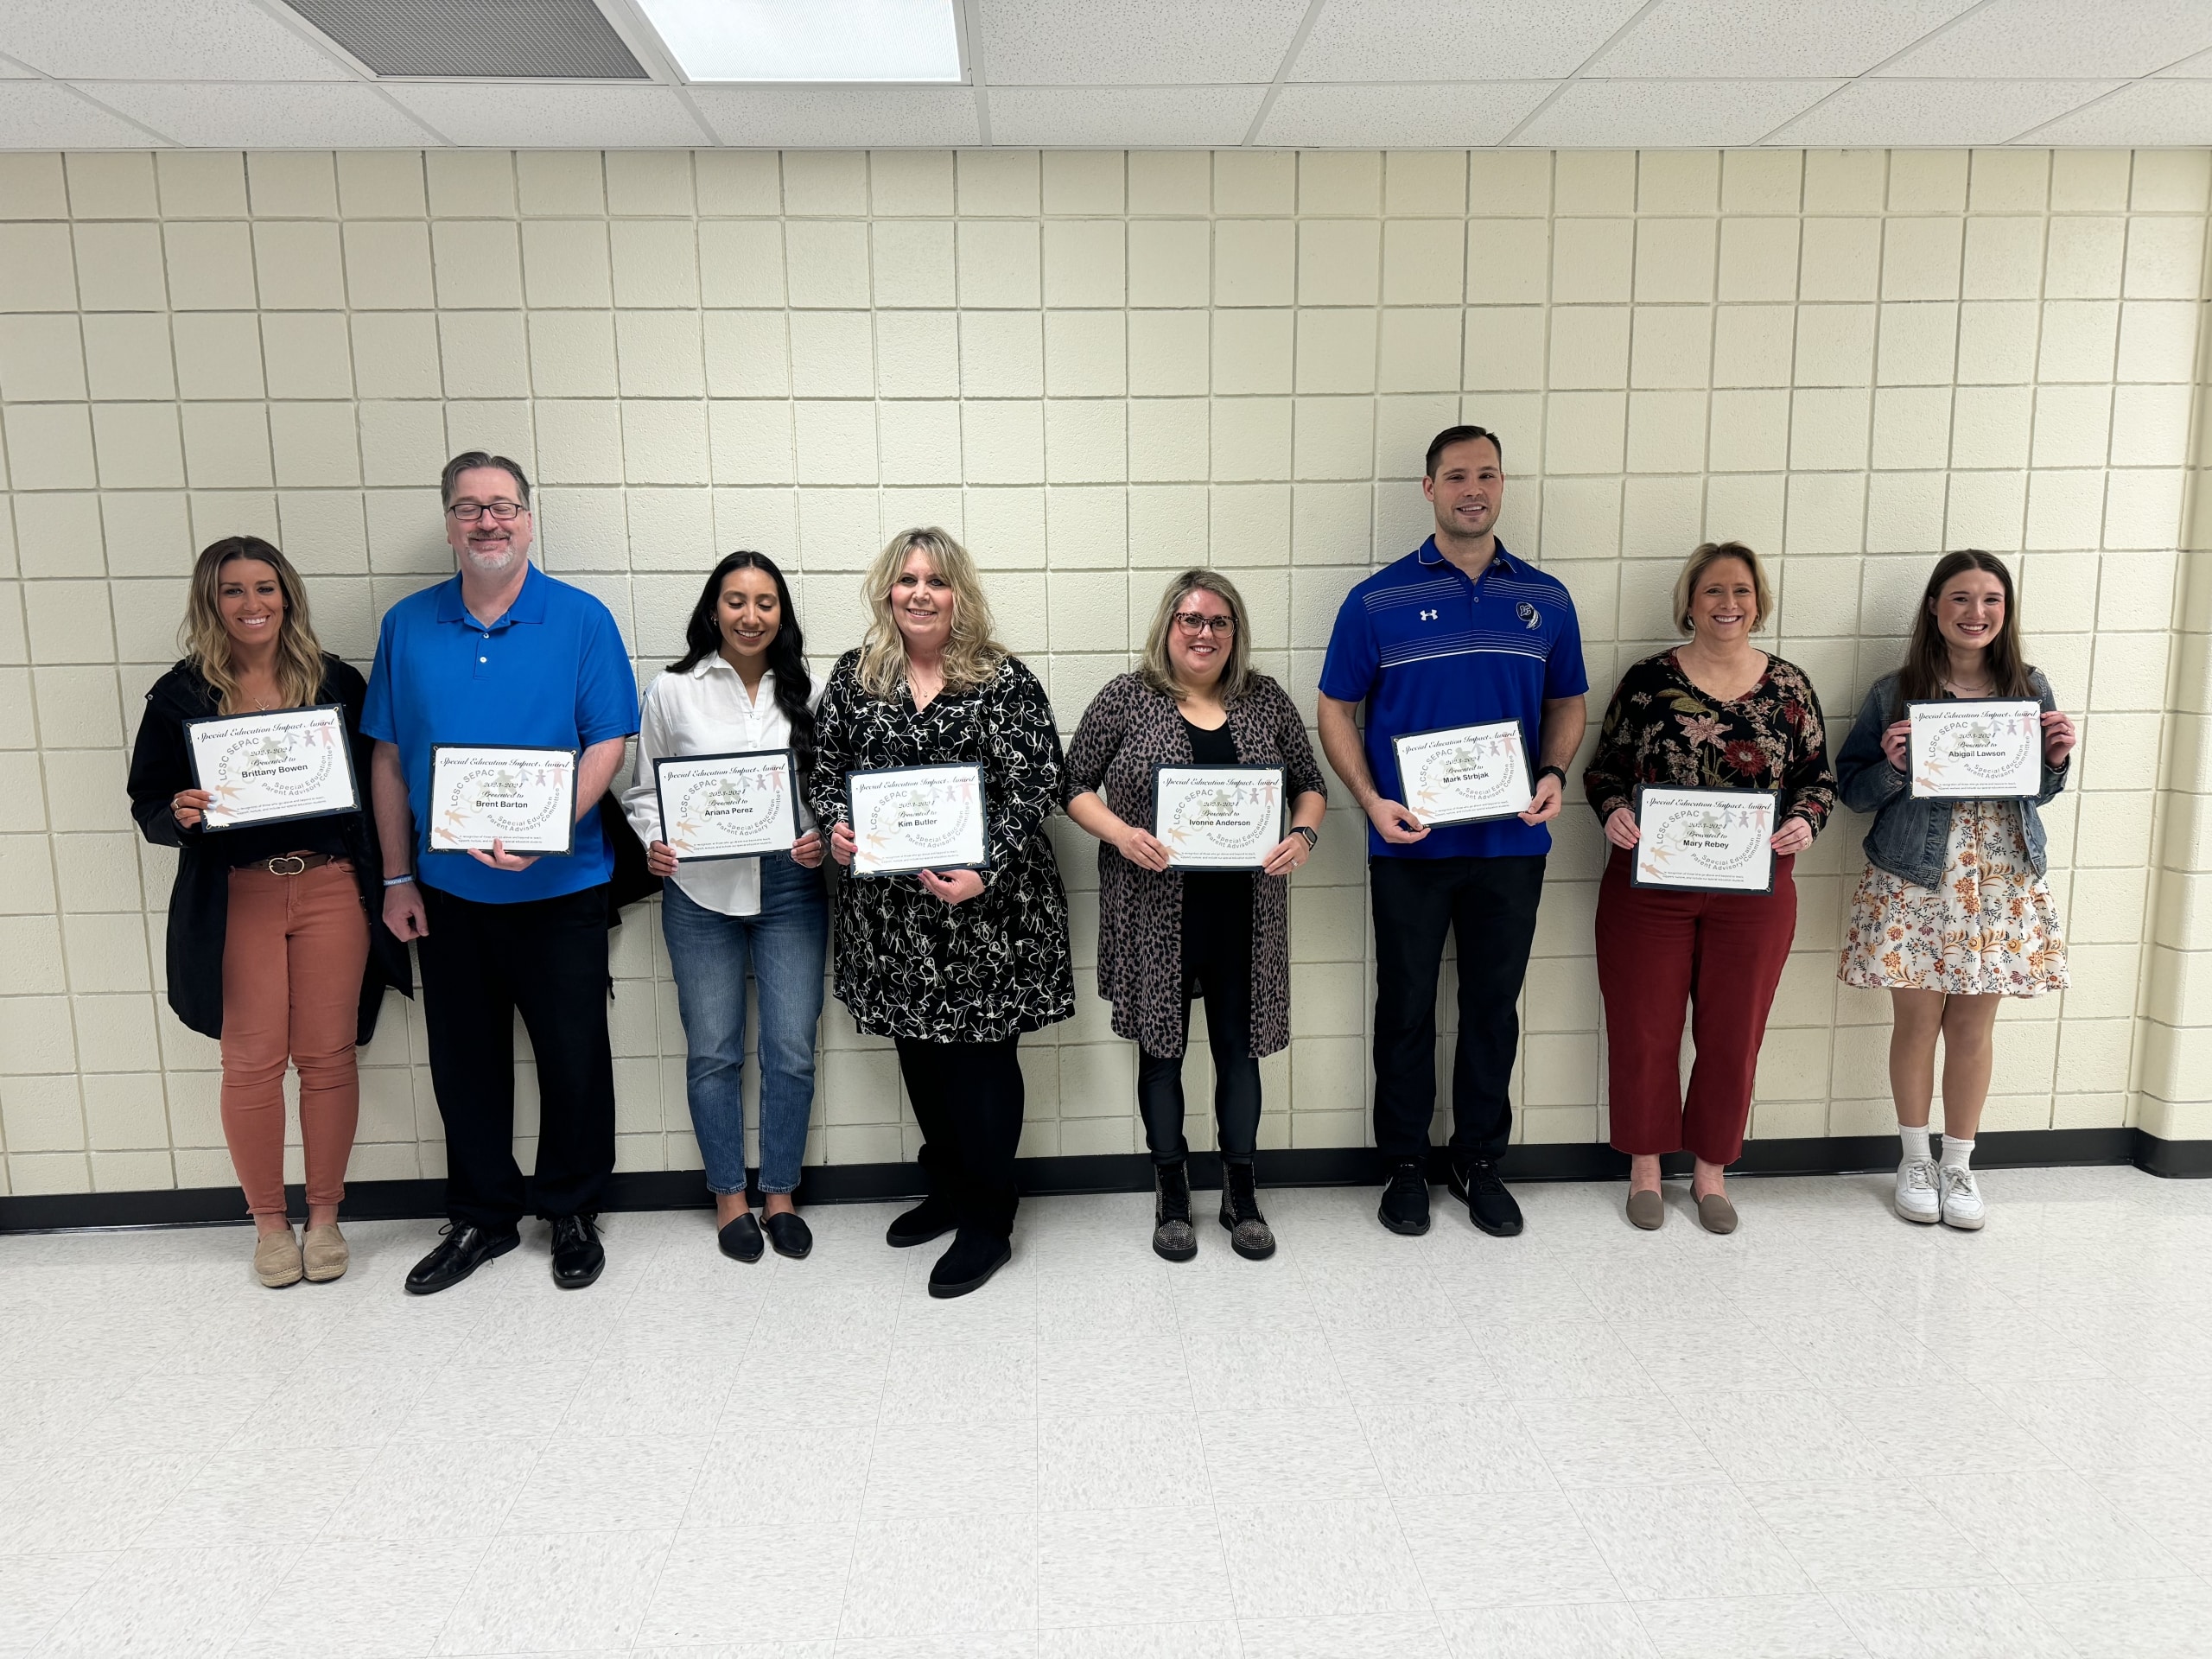 The LCSC Special Education Parent Advisory Council presented their Imapct Award to staff members for their outstanding support of students with disabilities.